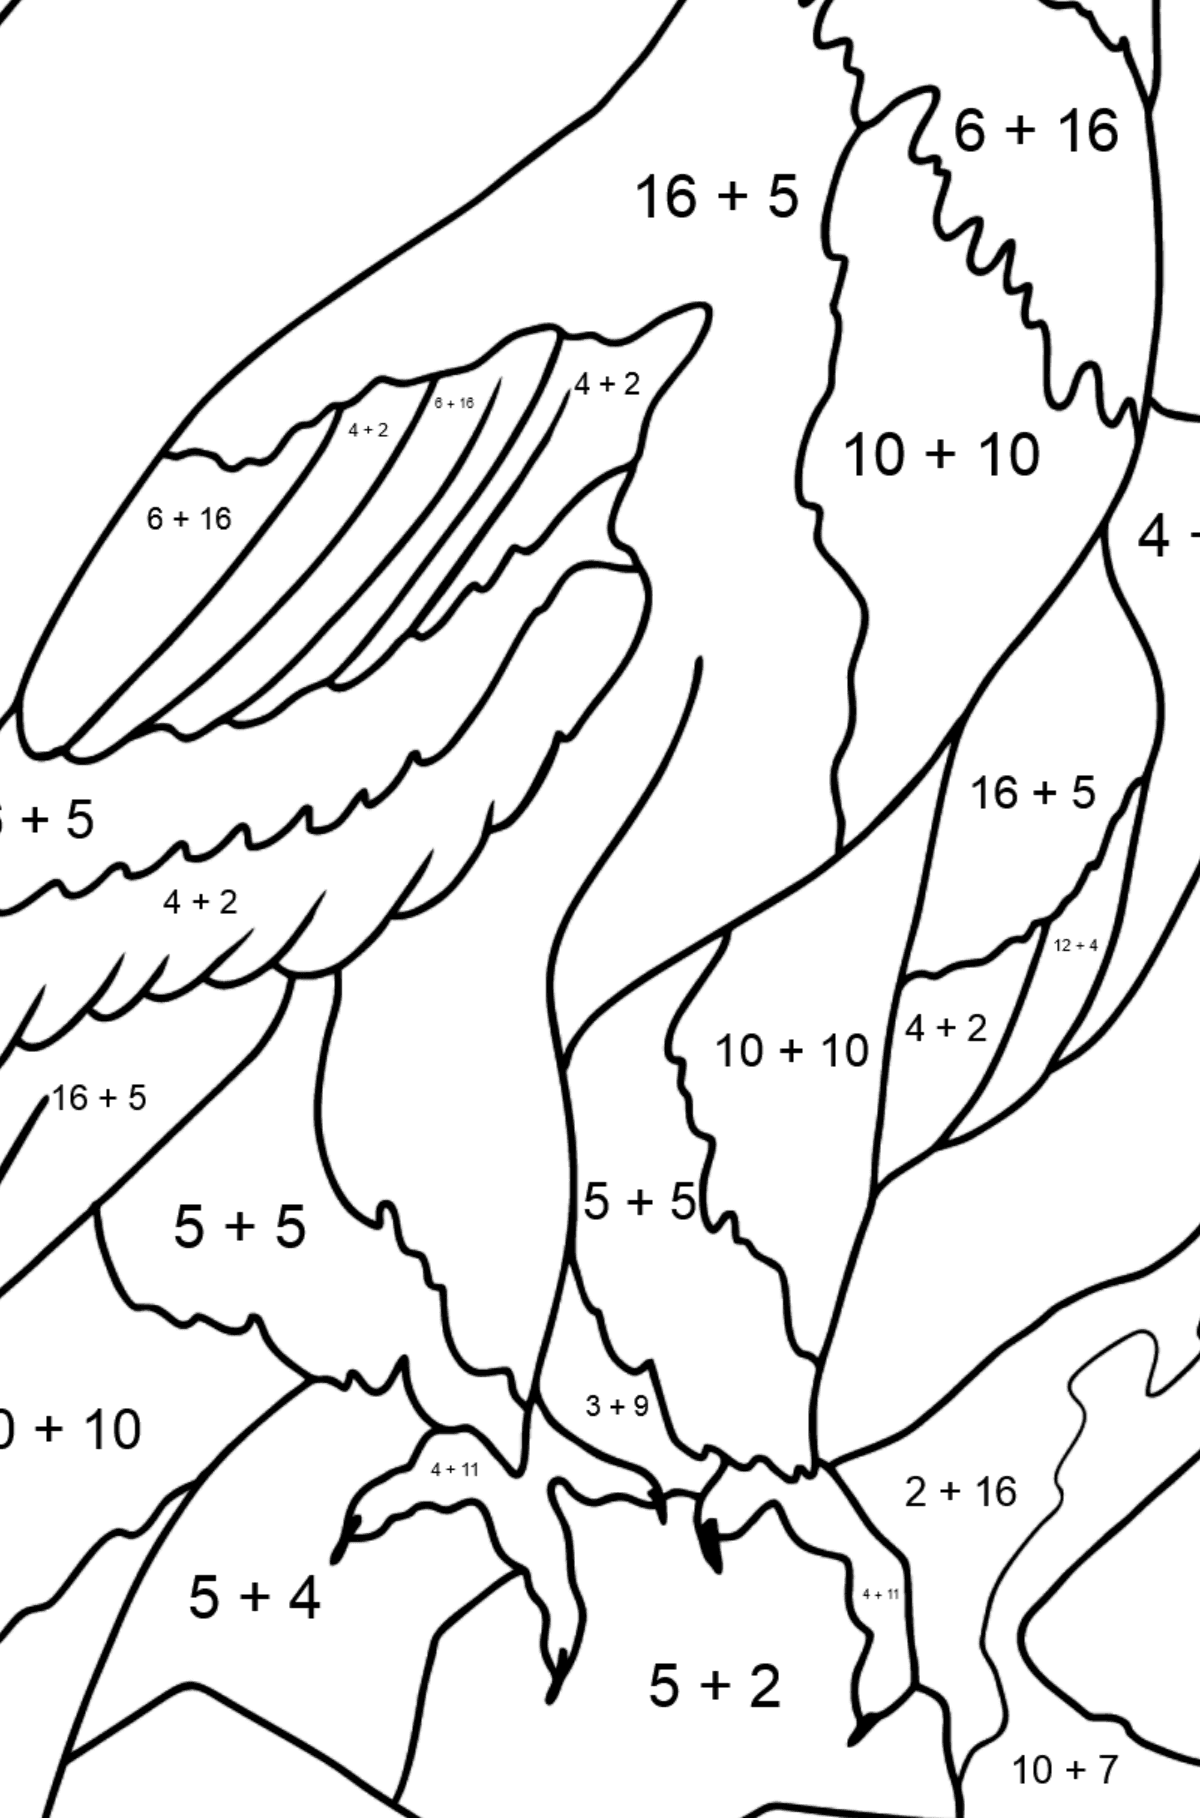 Coloring Page - An Eagle is Looking for Prey - Math Coloring - Addition for Kids